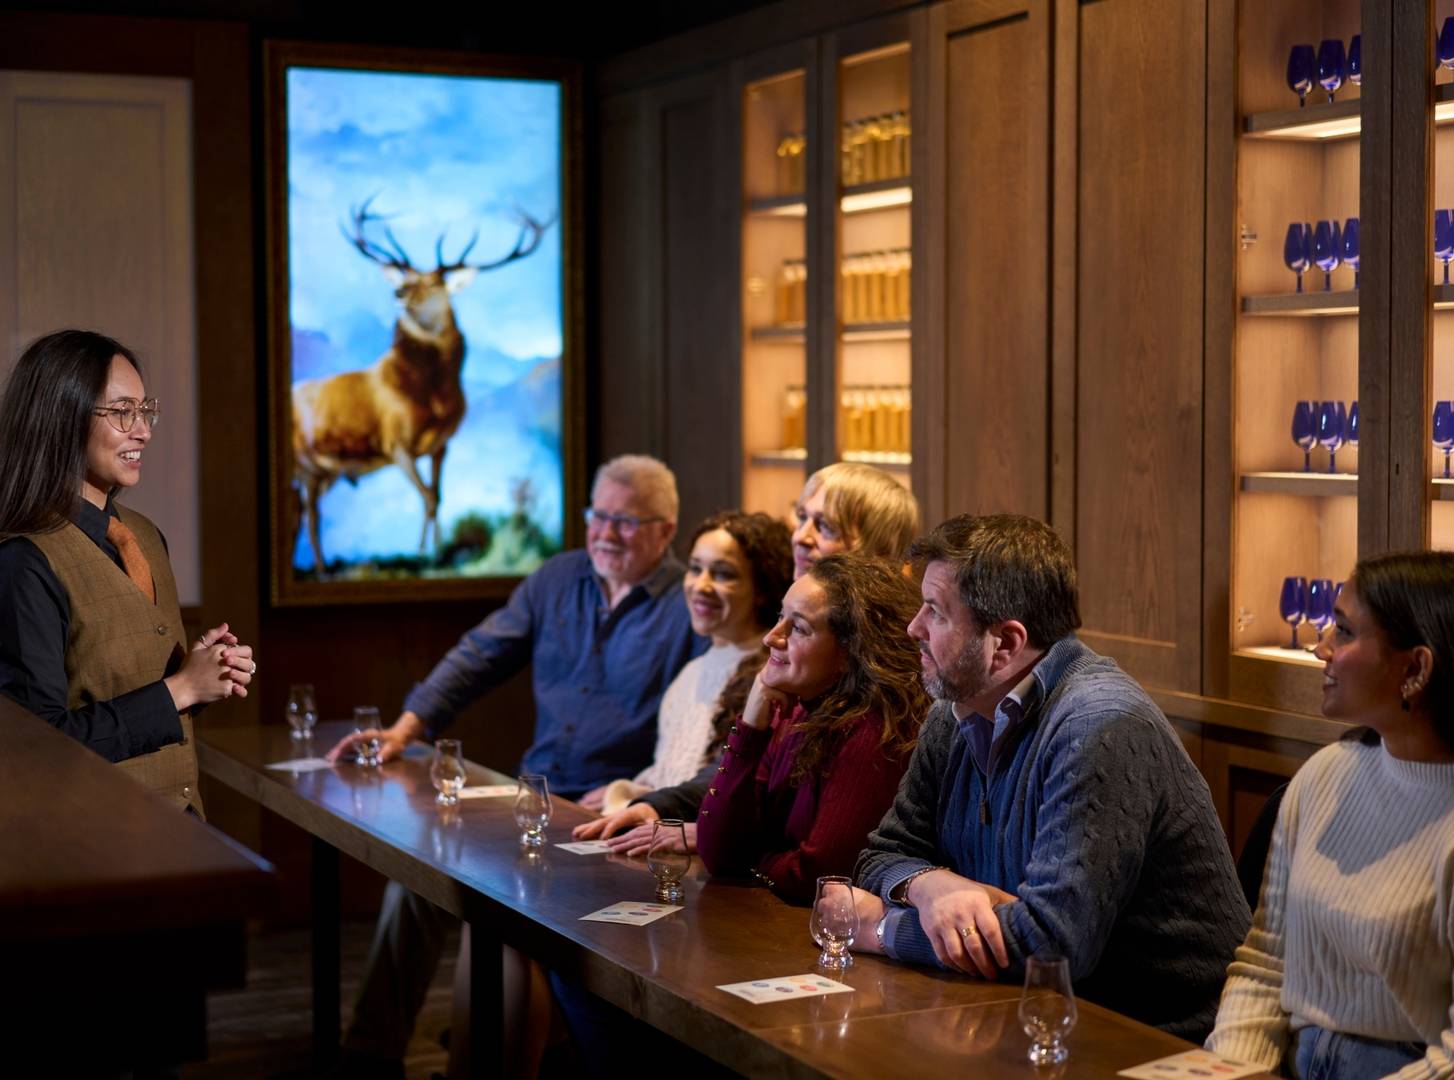 Tour guide and visitors within the Blender's sample room at The Scotch Whisky Experience,© The Scotch Whisky Experience